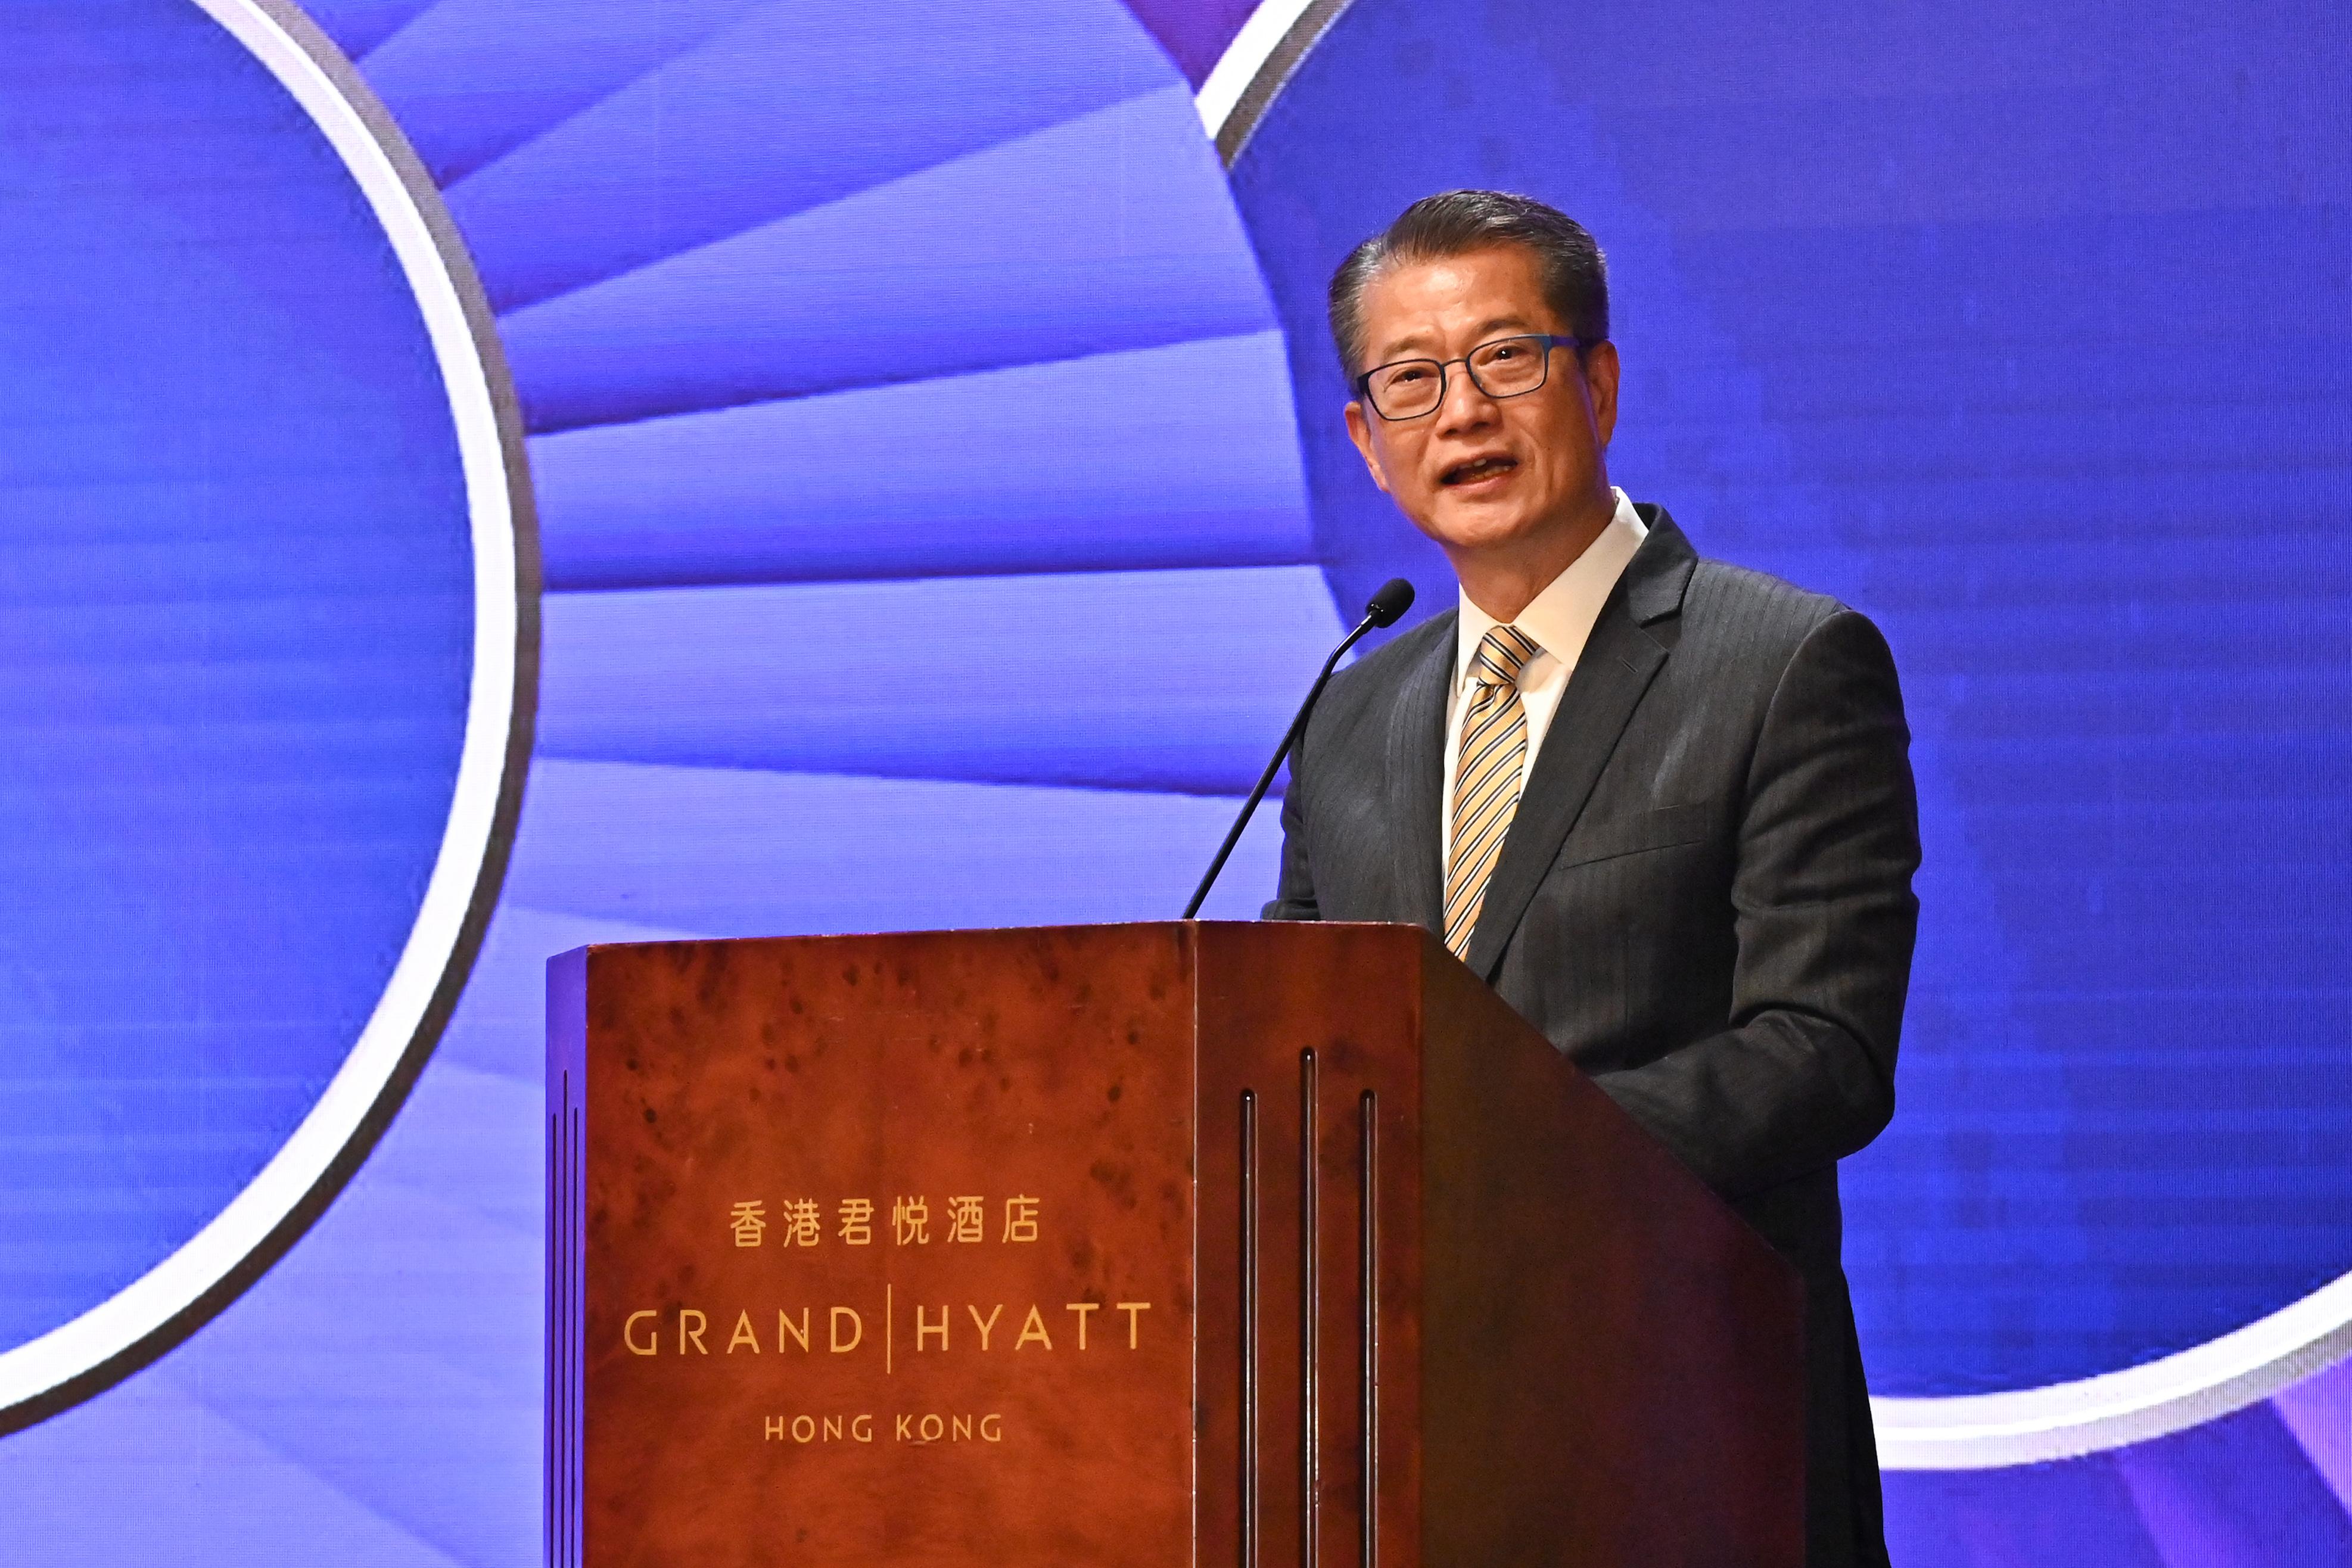 The Financial Secretary, Mr Paul Chan, speaks at the Chinese University of Hong Kong Business School 60th Anniversary Reception today (March 9).